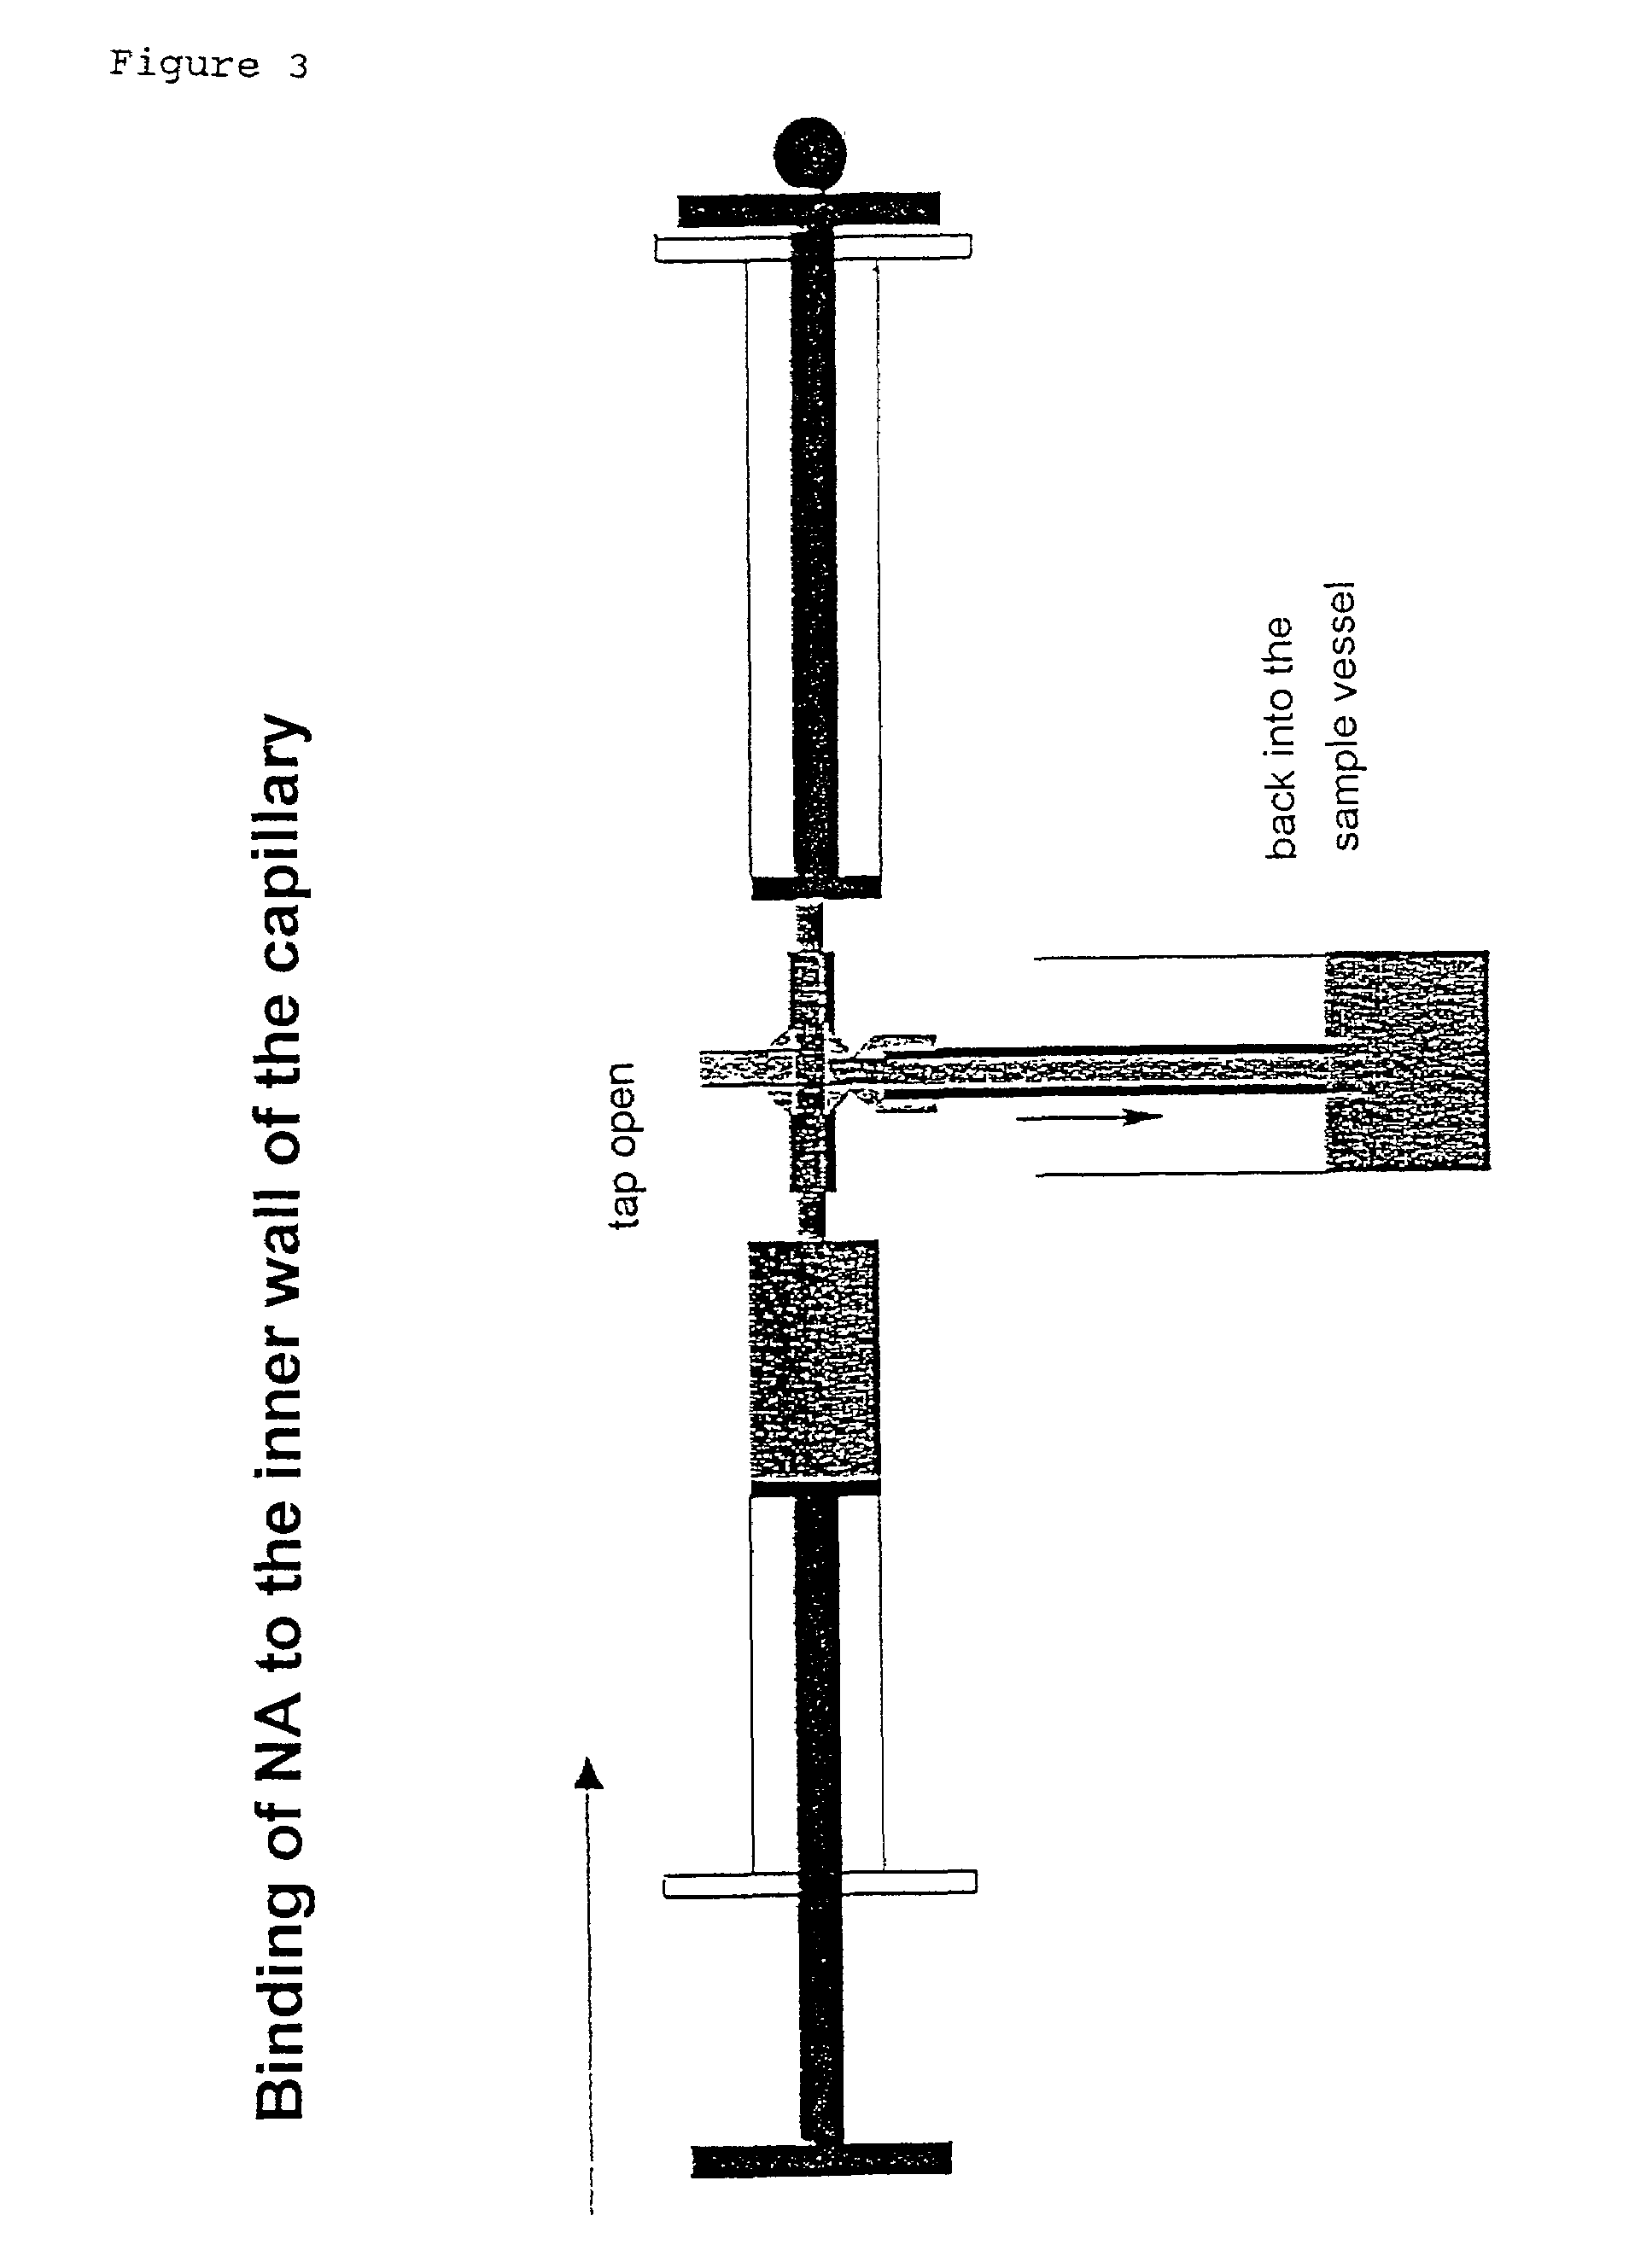 System for simple nucleic acid analysis